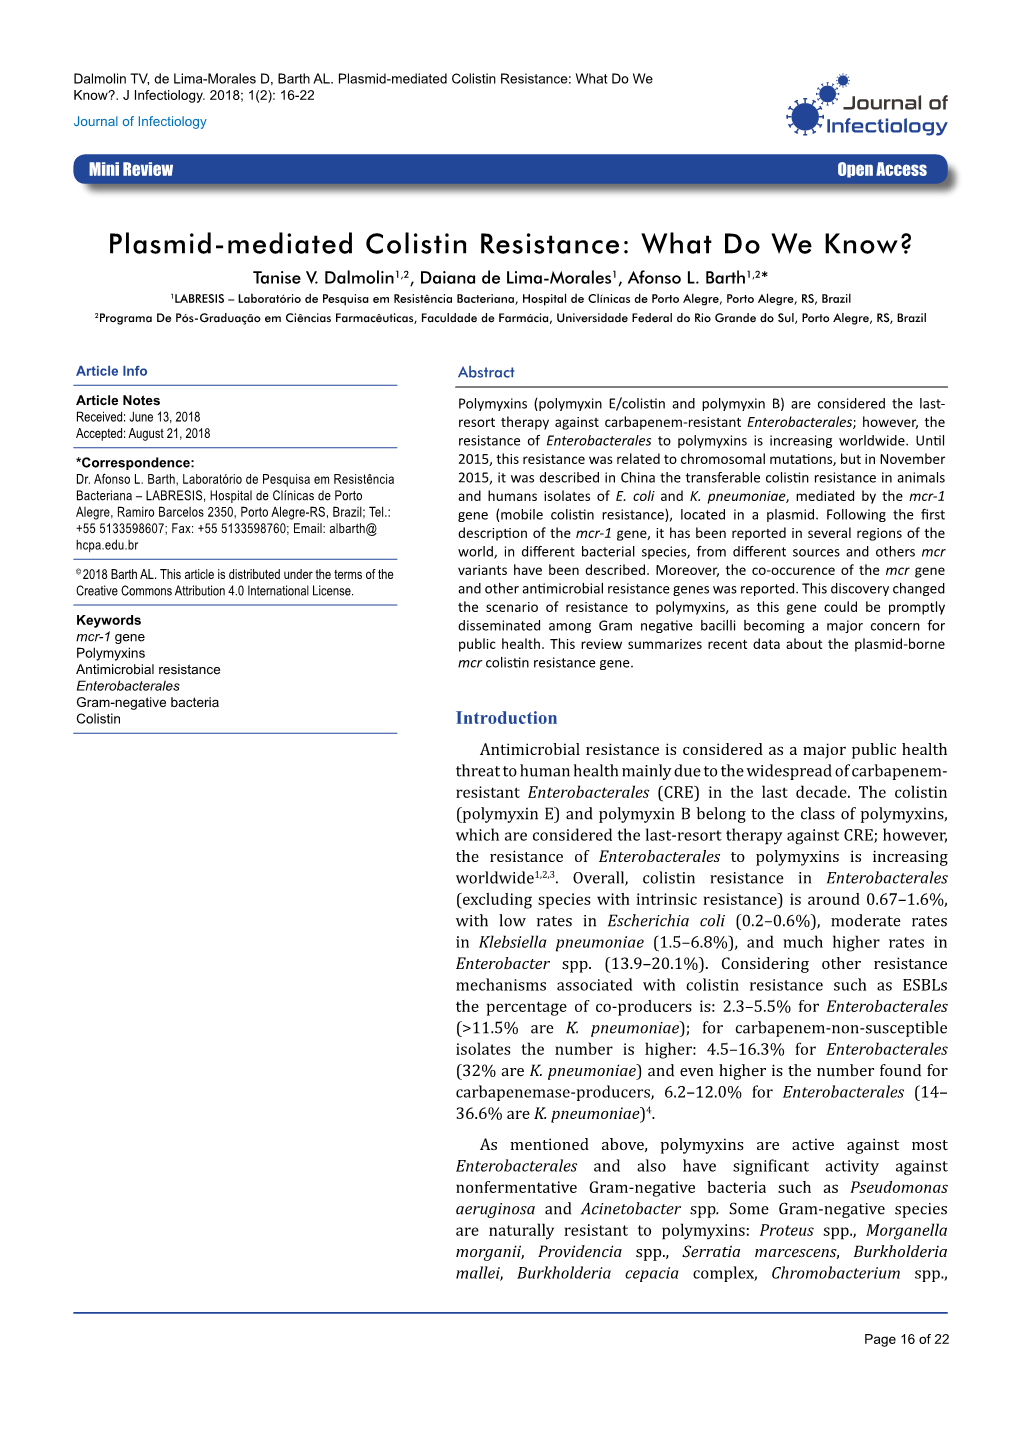 Plasmid-Mediated Colistin Resistance: What Do We Know?